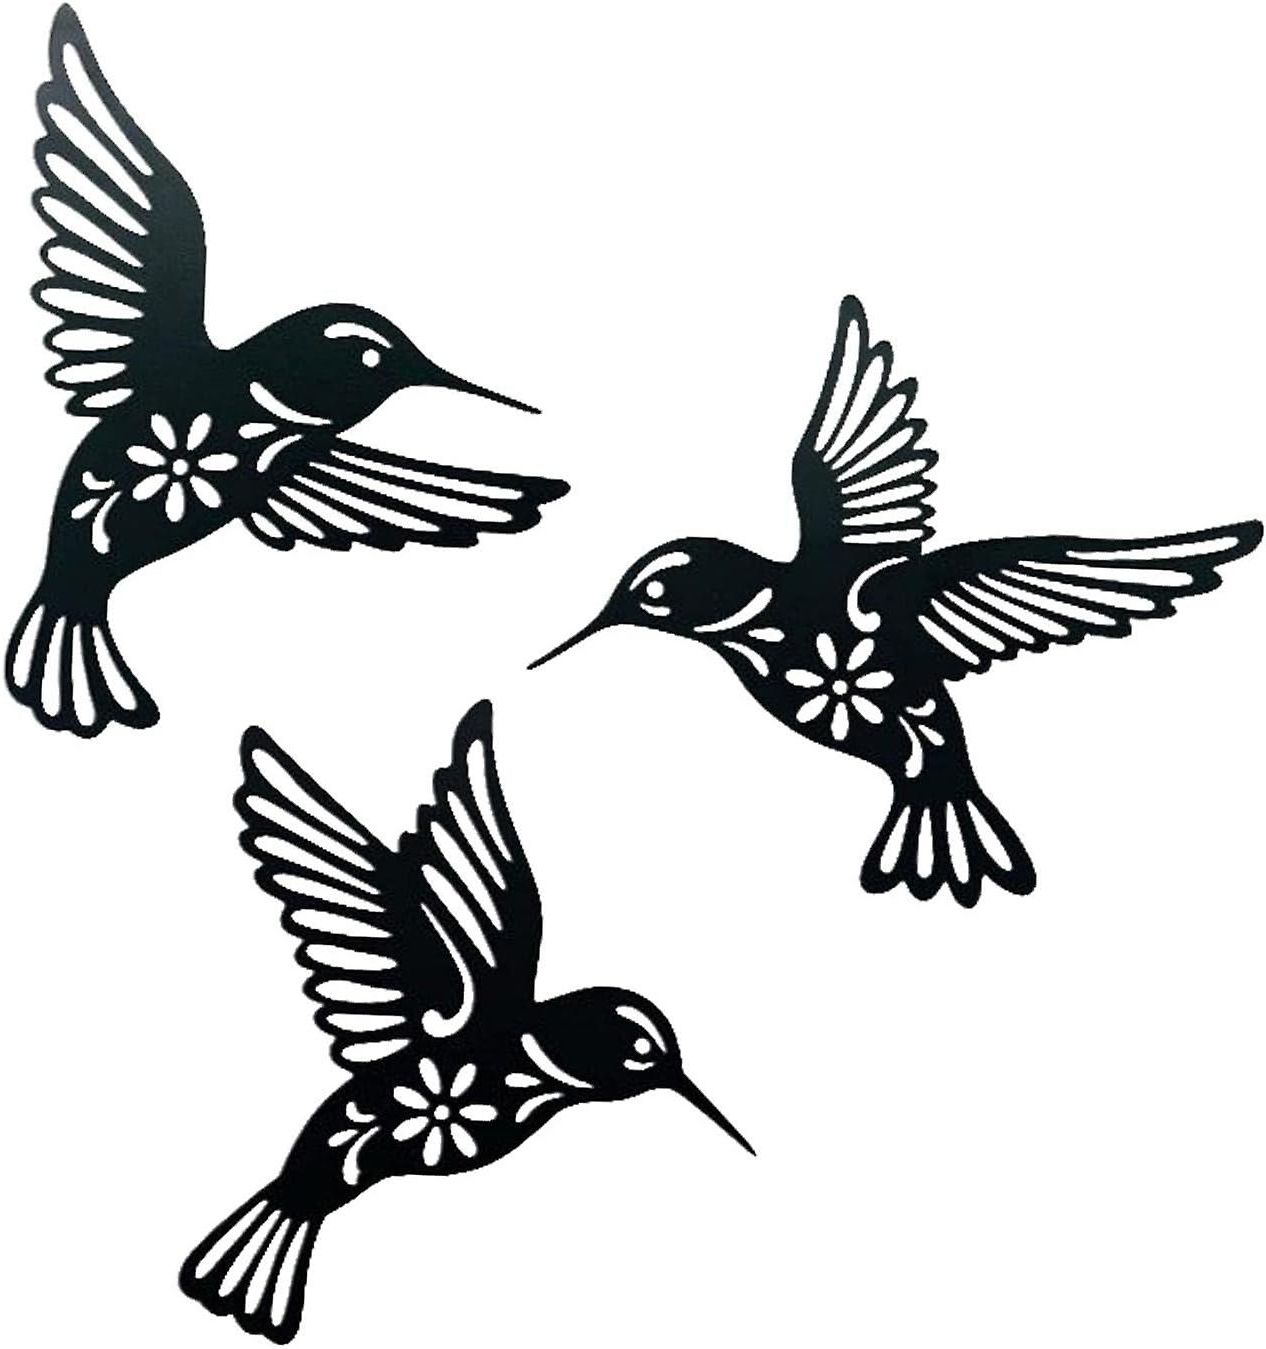 Widely Used Hummingbird Wall Art Throughout 3pcs Hanging Hummingbird Wall Decor Silhouette Handmade Bird Wall Art  Decoration For Kids Nursery Classroom Outdoor Bedroom Ornaments (View 13 of 15)